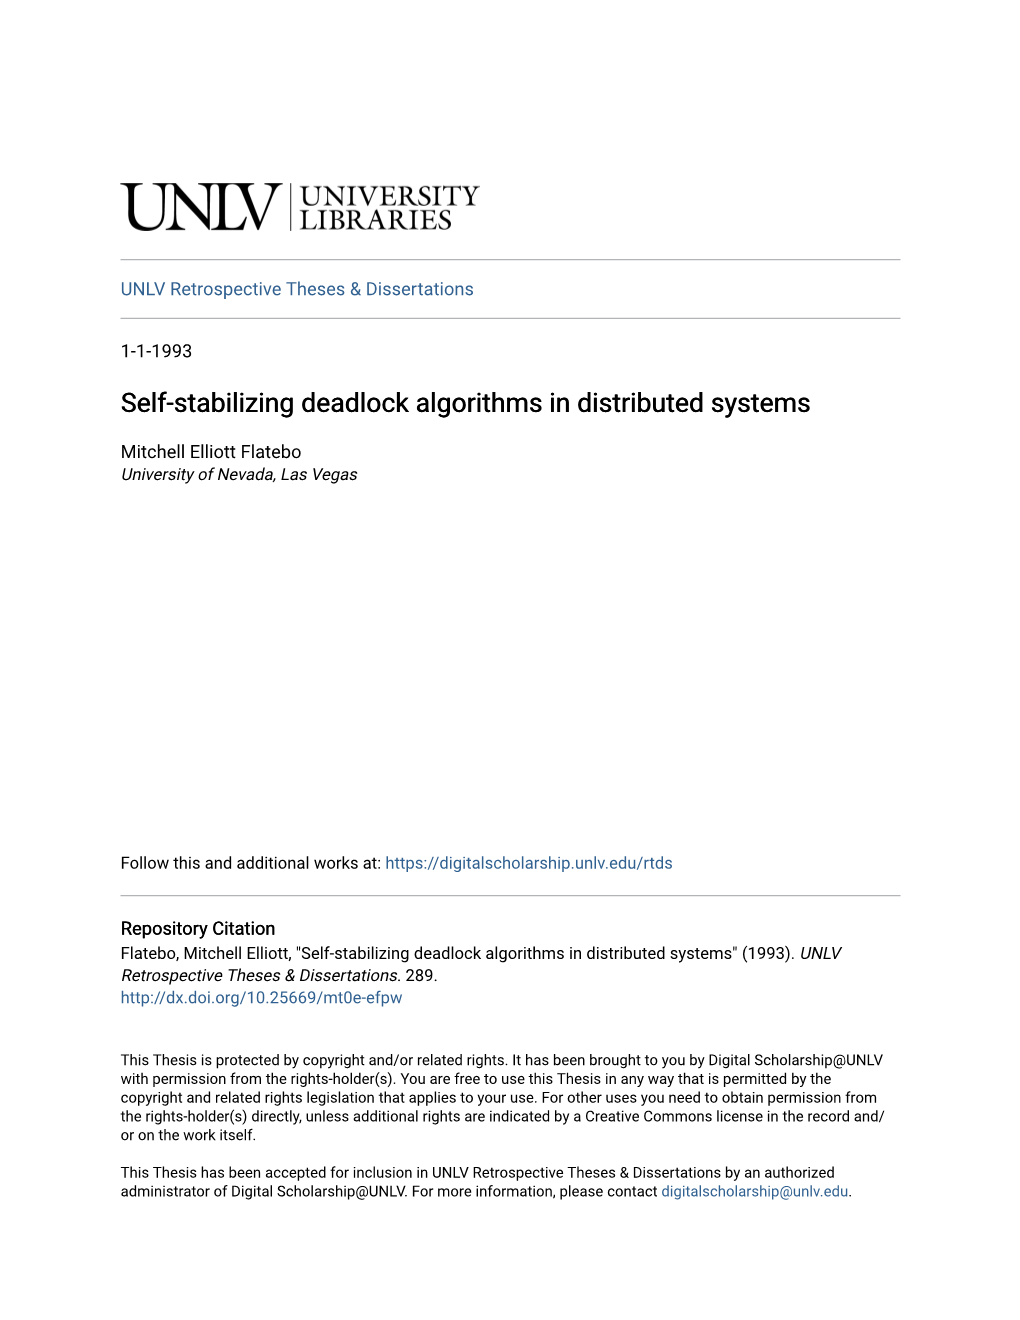 Self-Stabilizing Deadlock Algorithms in Distributed Systems